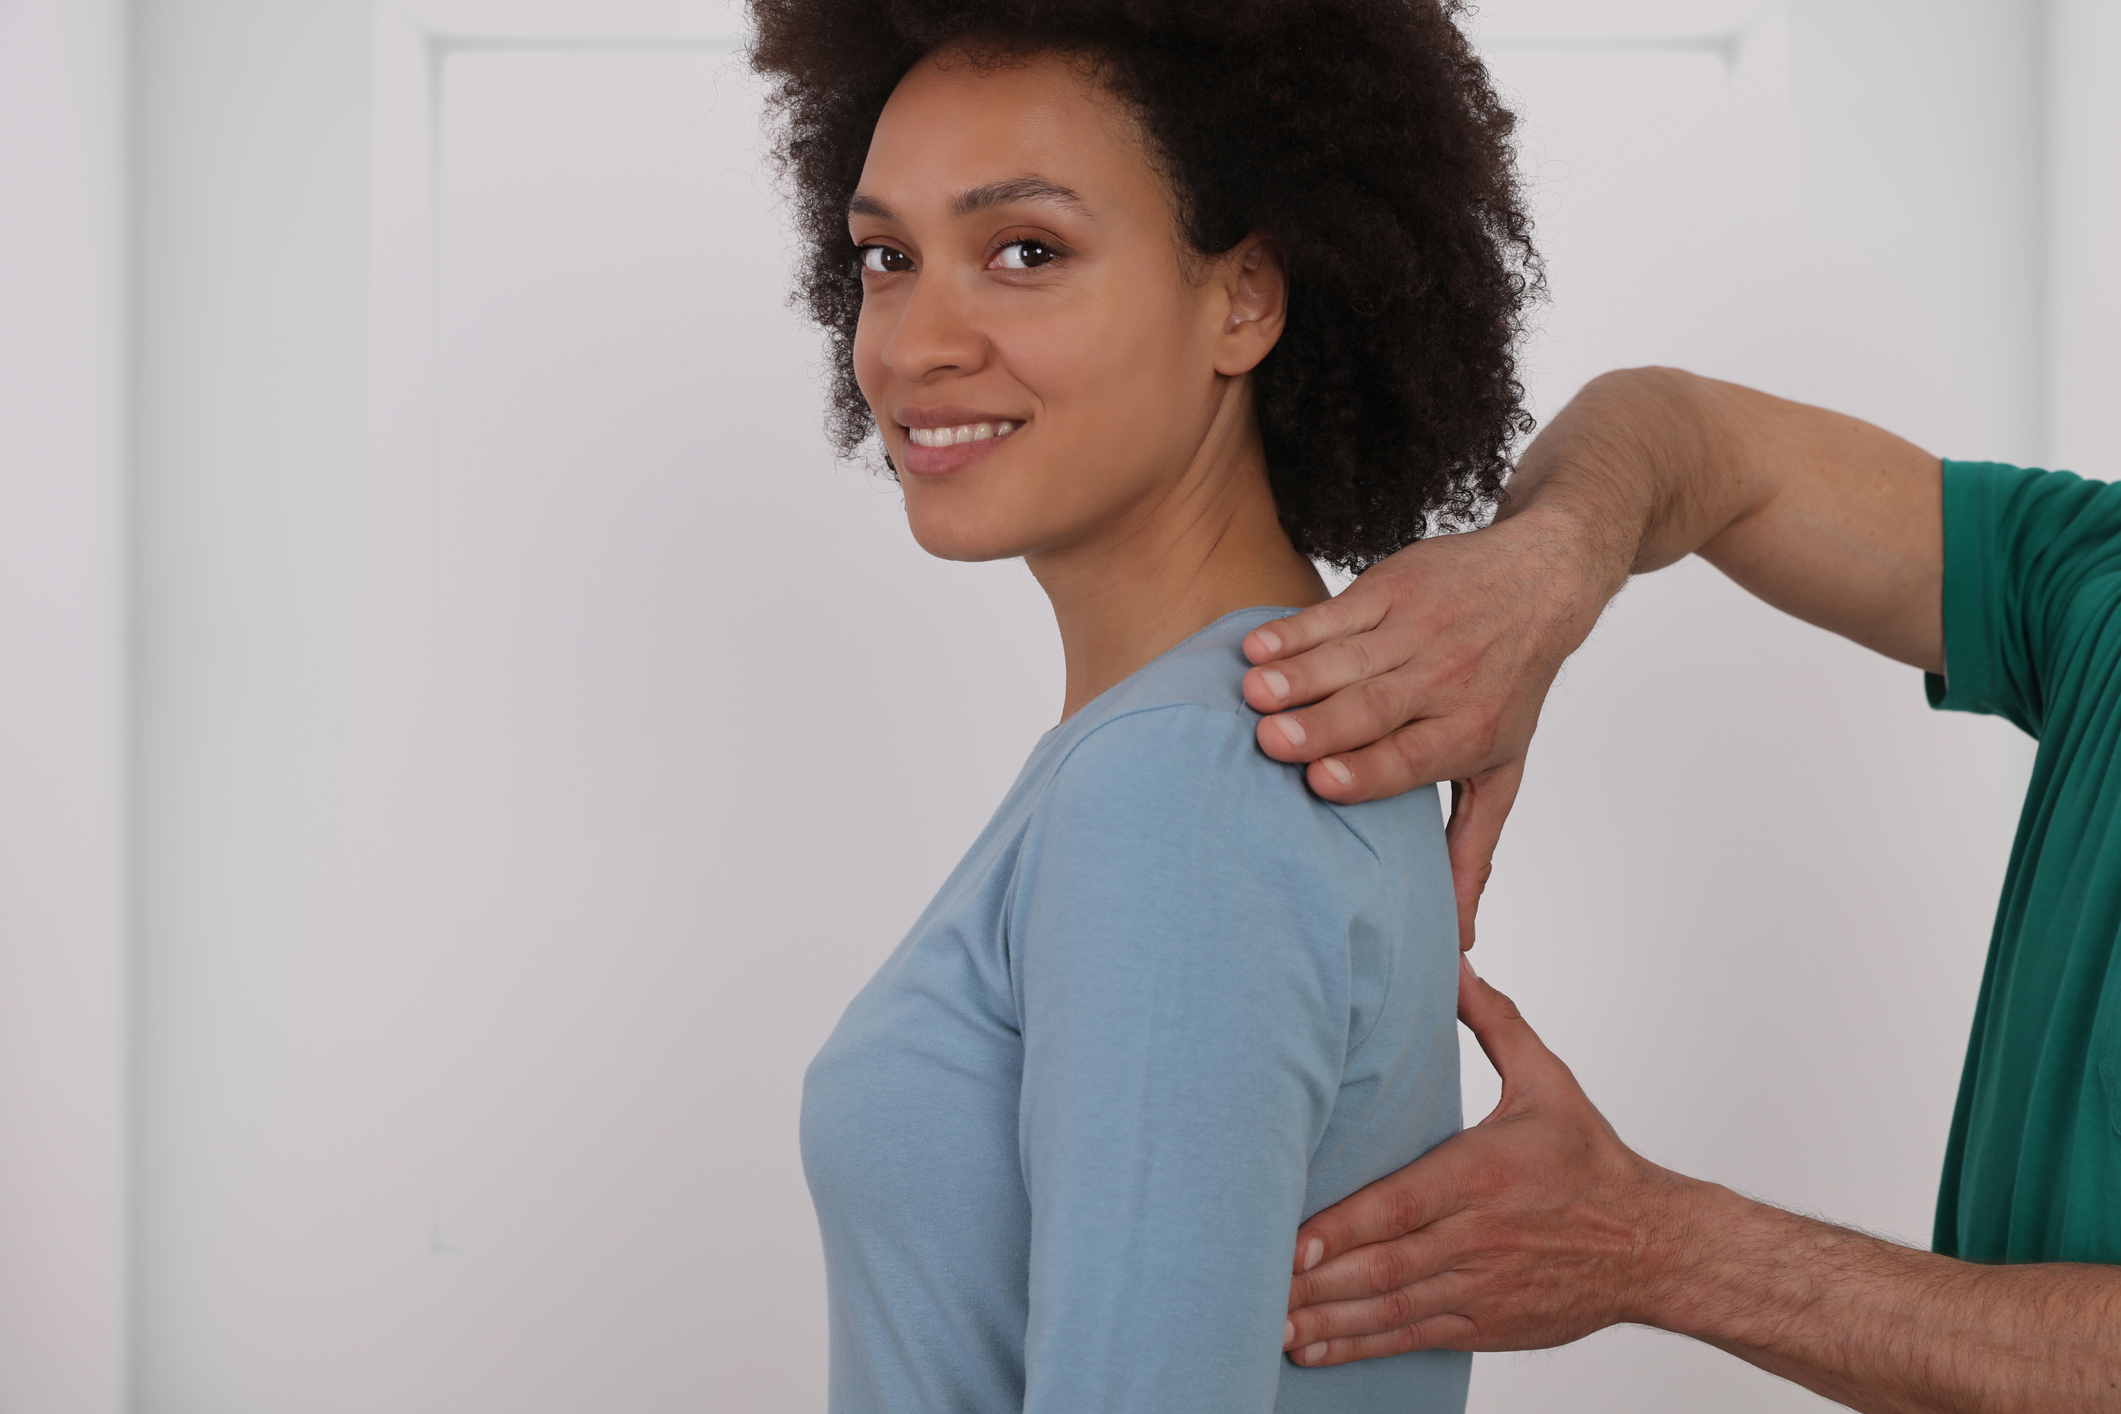 Conditions scientifically shown to benefit from chiropractic care